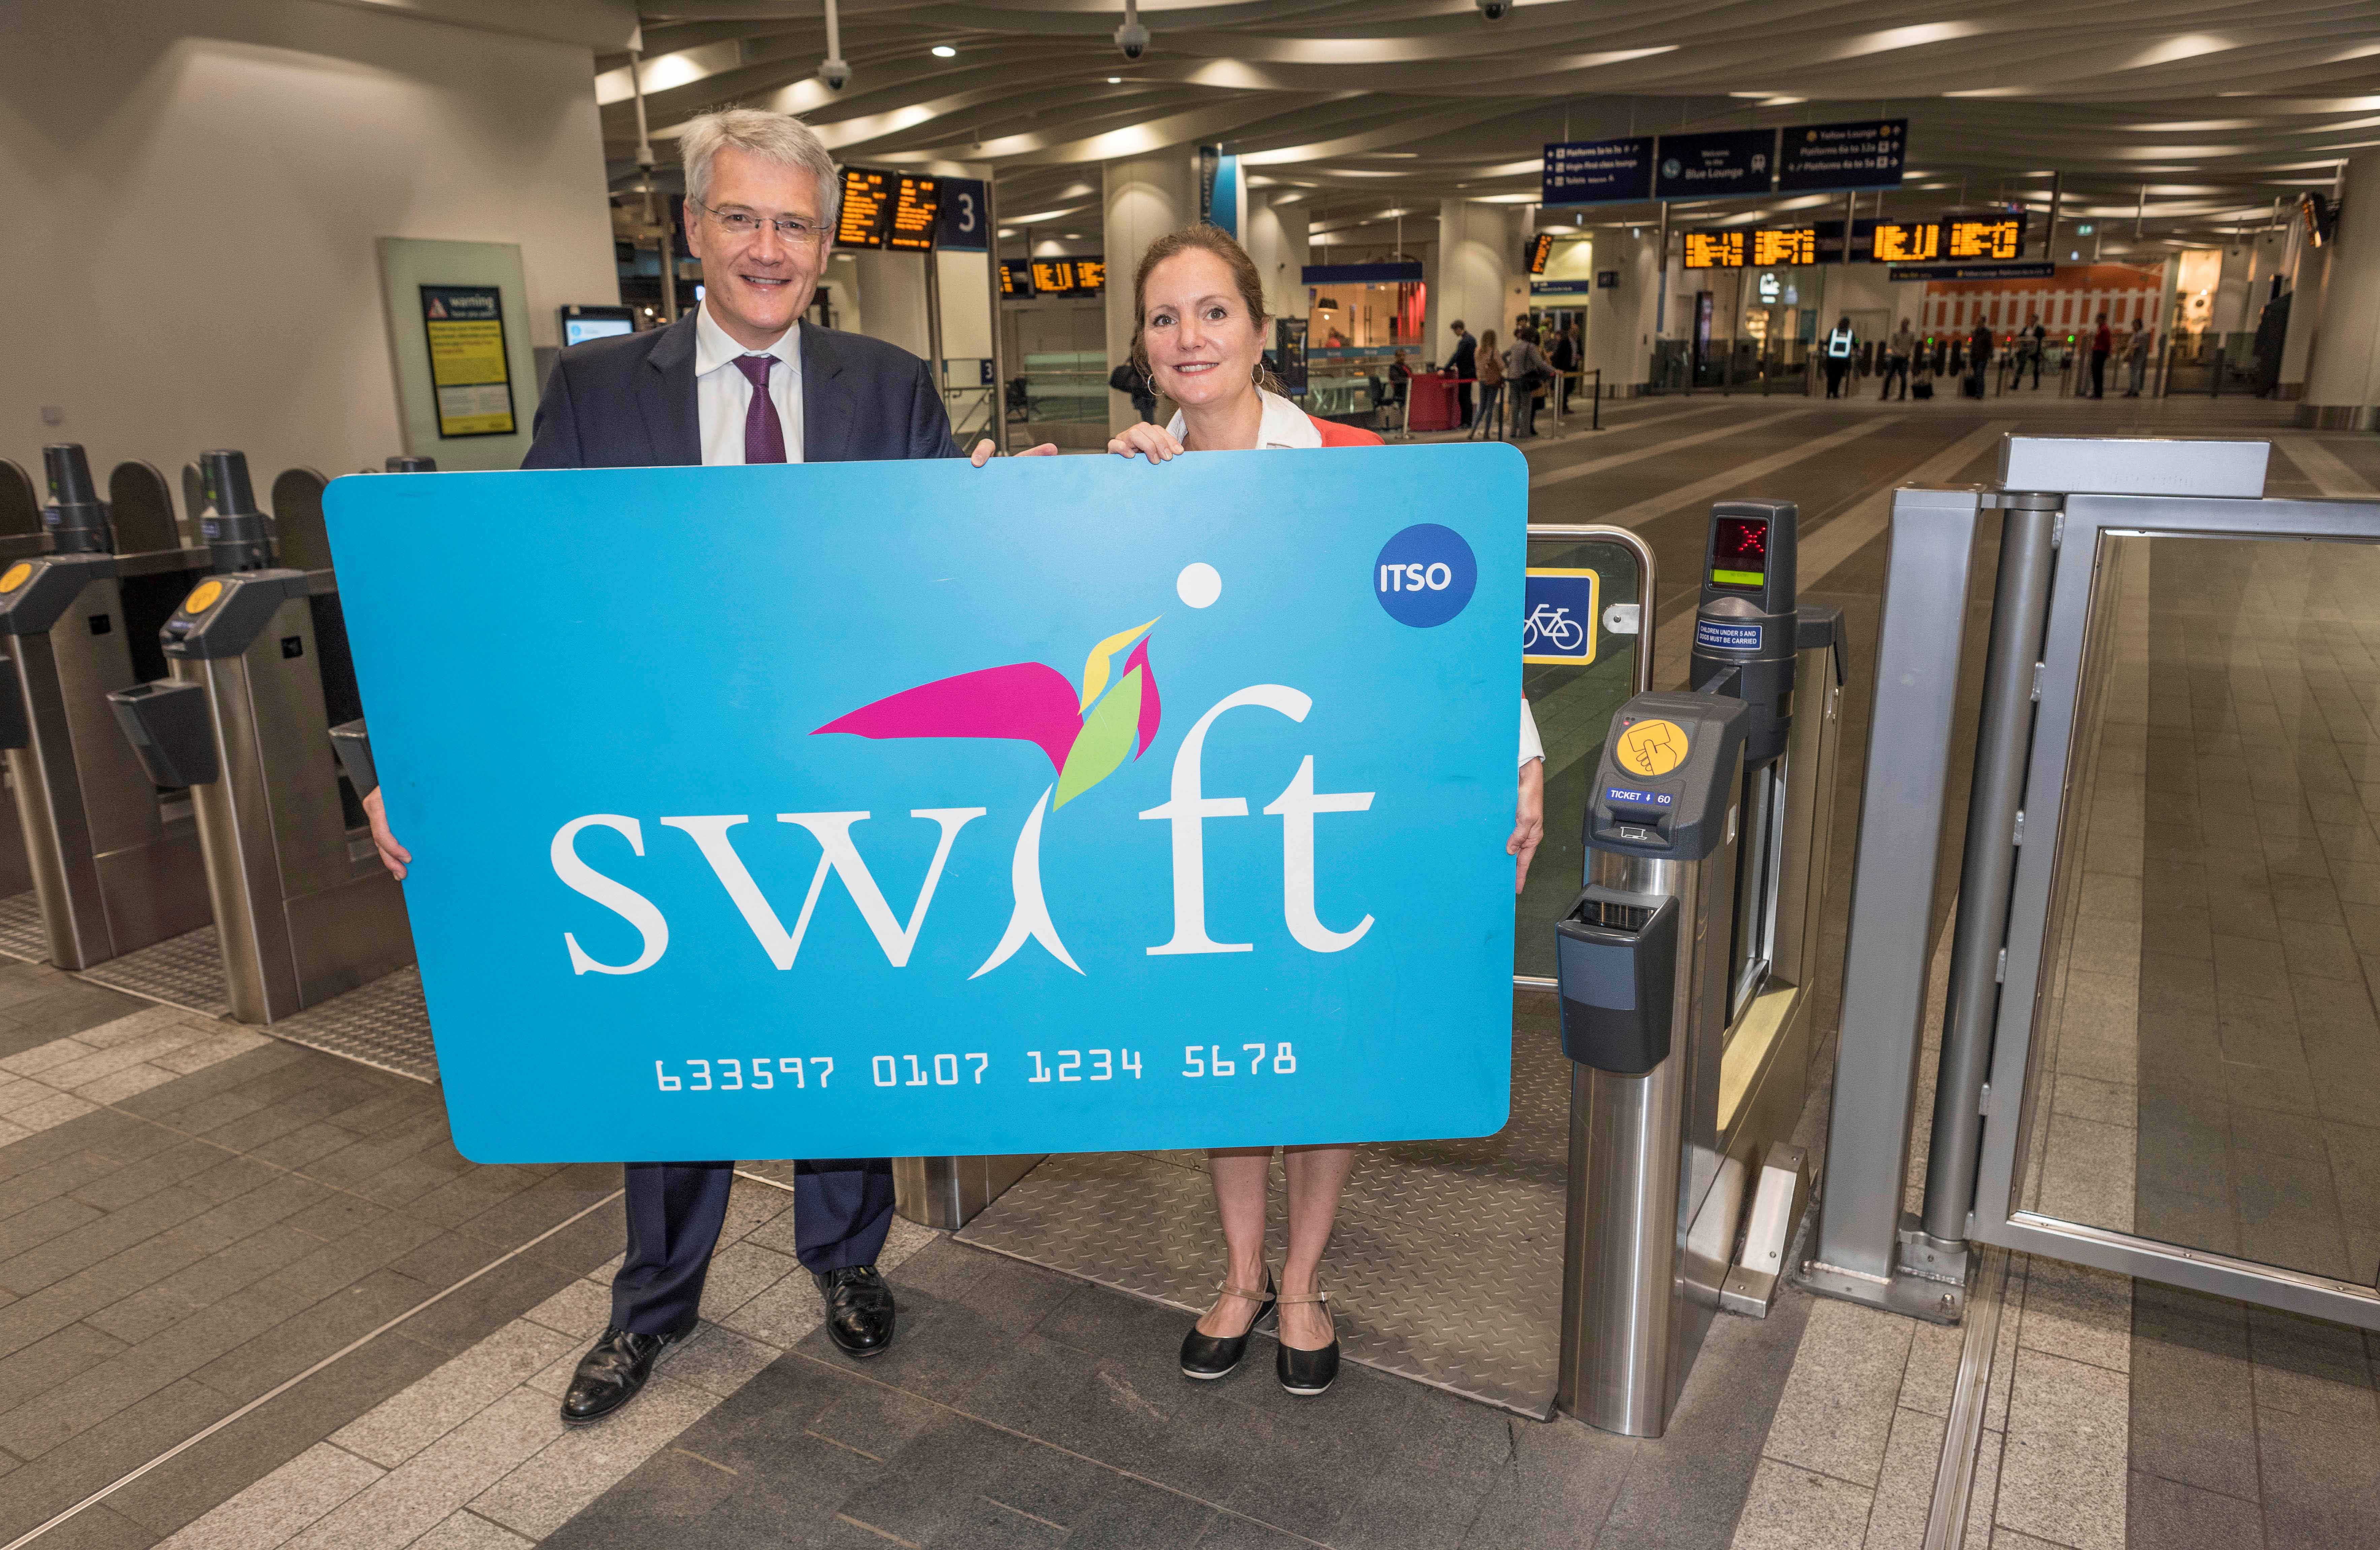 Transport minister Andrew Jones MP, left, launches Swift on rail with Laura Shoaf of Transport for West Midlands.